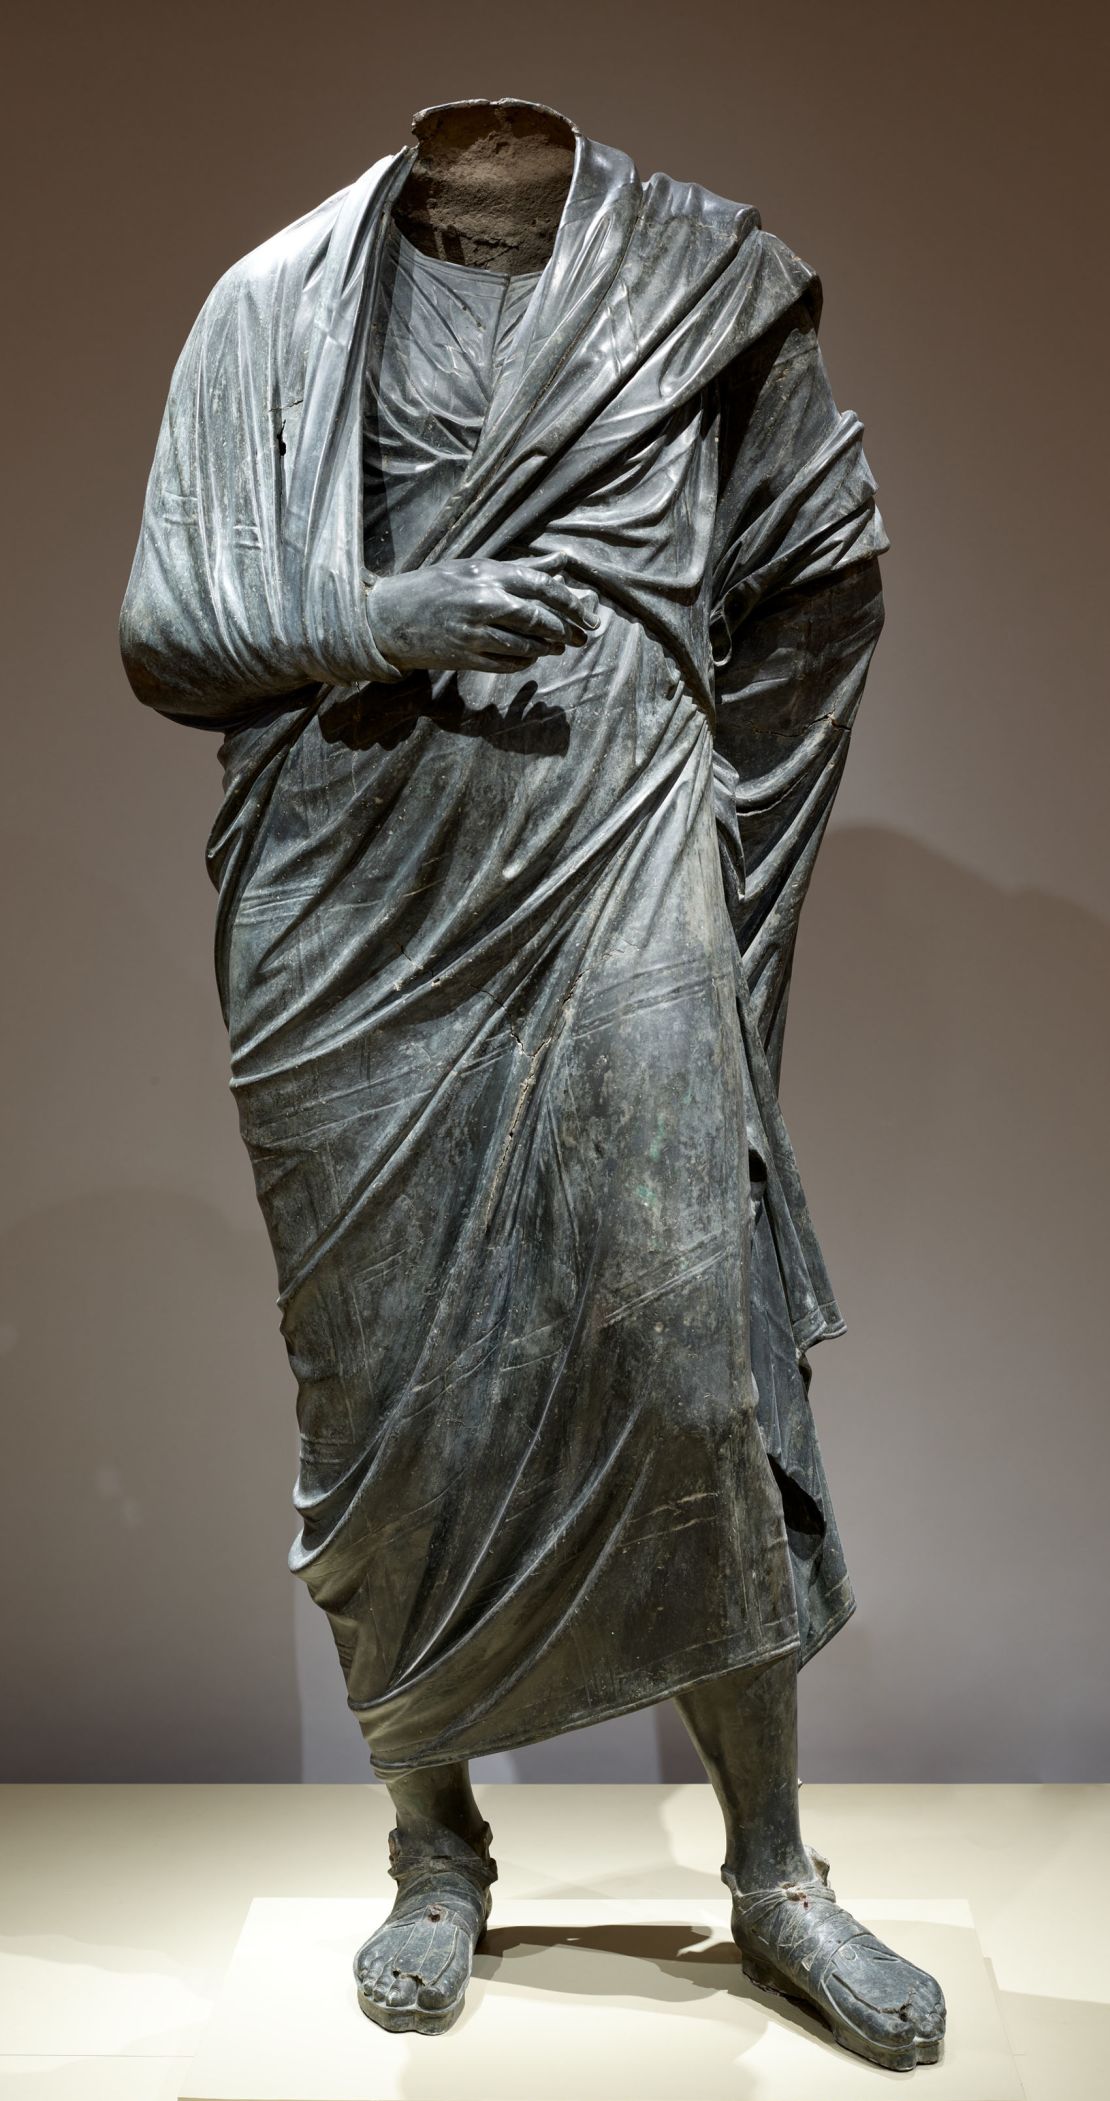 Draped Male Figure, c. 150 BCE--200 CE. Roman or possibly Greek Hellenistic. Bronze, hollow cast in several pieces and joined; overall: 193 cm (76 in.). The Cleveland Museum of Art, Leonard C. Hanna, Jr. Fund 1986.5